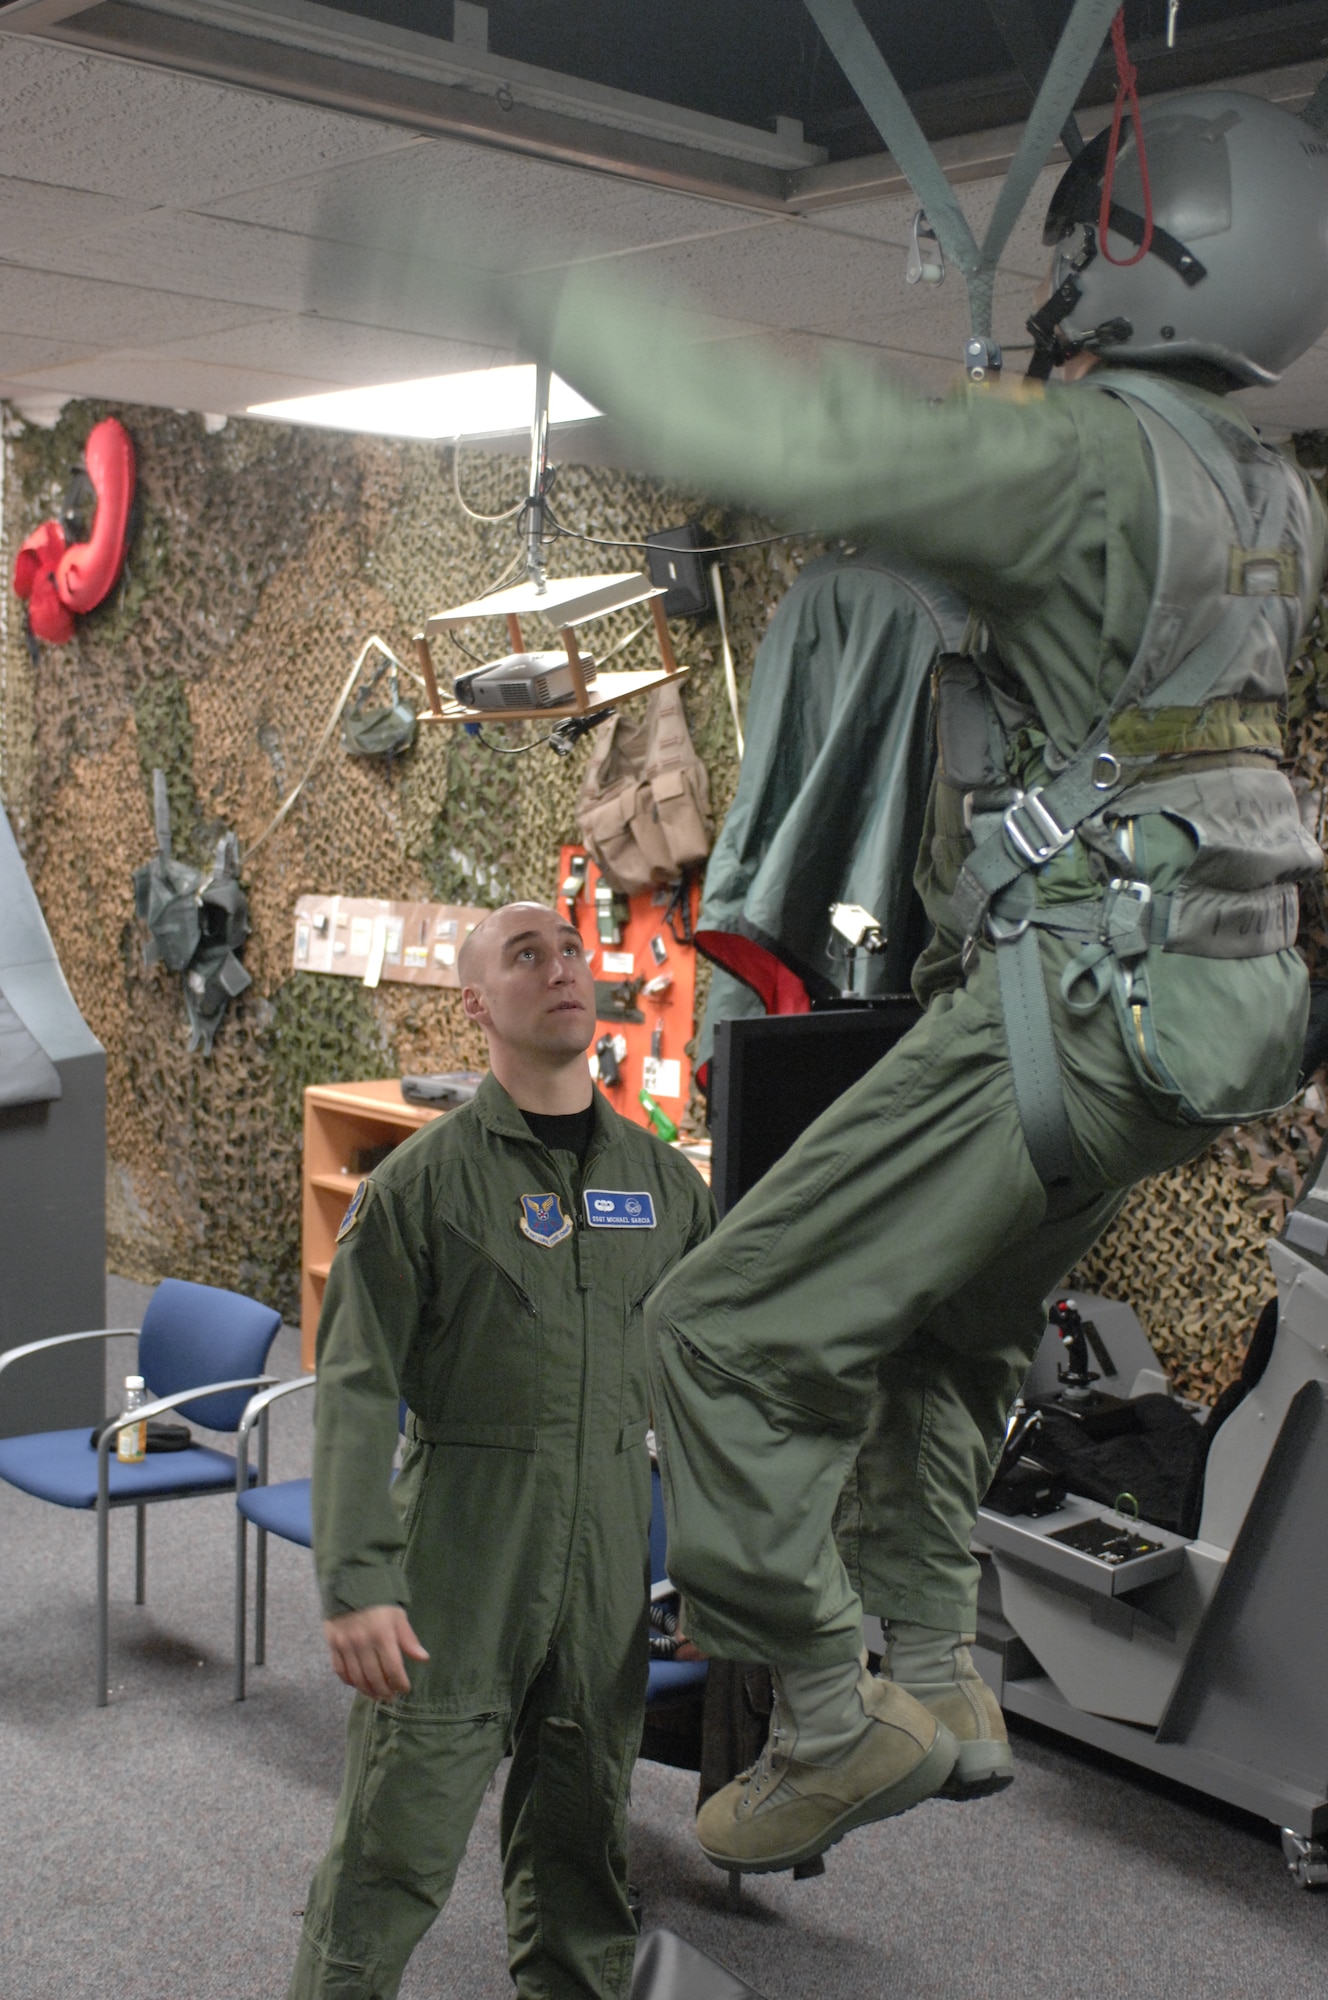 WHITEMAN AIR FORCE BASE, Mo. -- Staff Sgt. Michael Garcia, 509th Operation Support Squadron, survival evasion resistance escape specialist, instructs Capt. Adam Goodpasture on post ejection parachute procedures during his SERE training Jan. 25. (U.S. Air Force photo by Airman 1st Class Montserrat Ramirez) (Released)